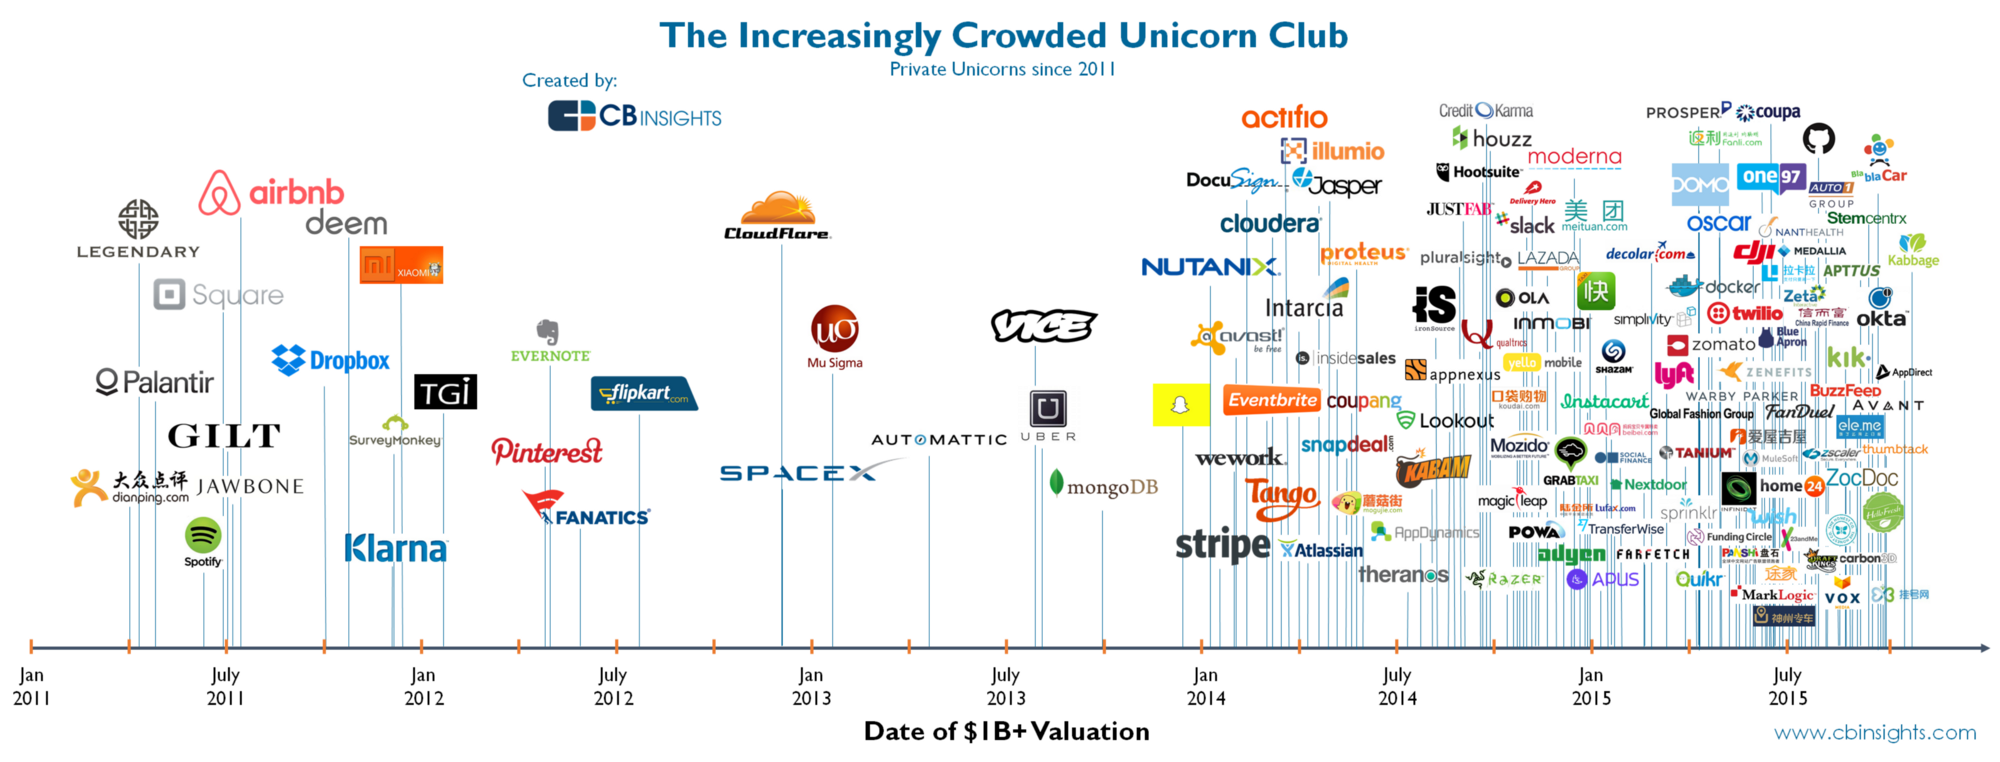 The evolution of the number of unicorns created since 2011